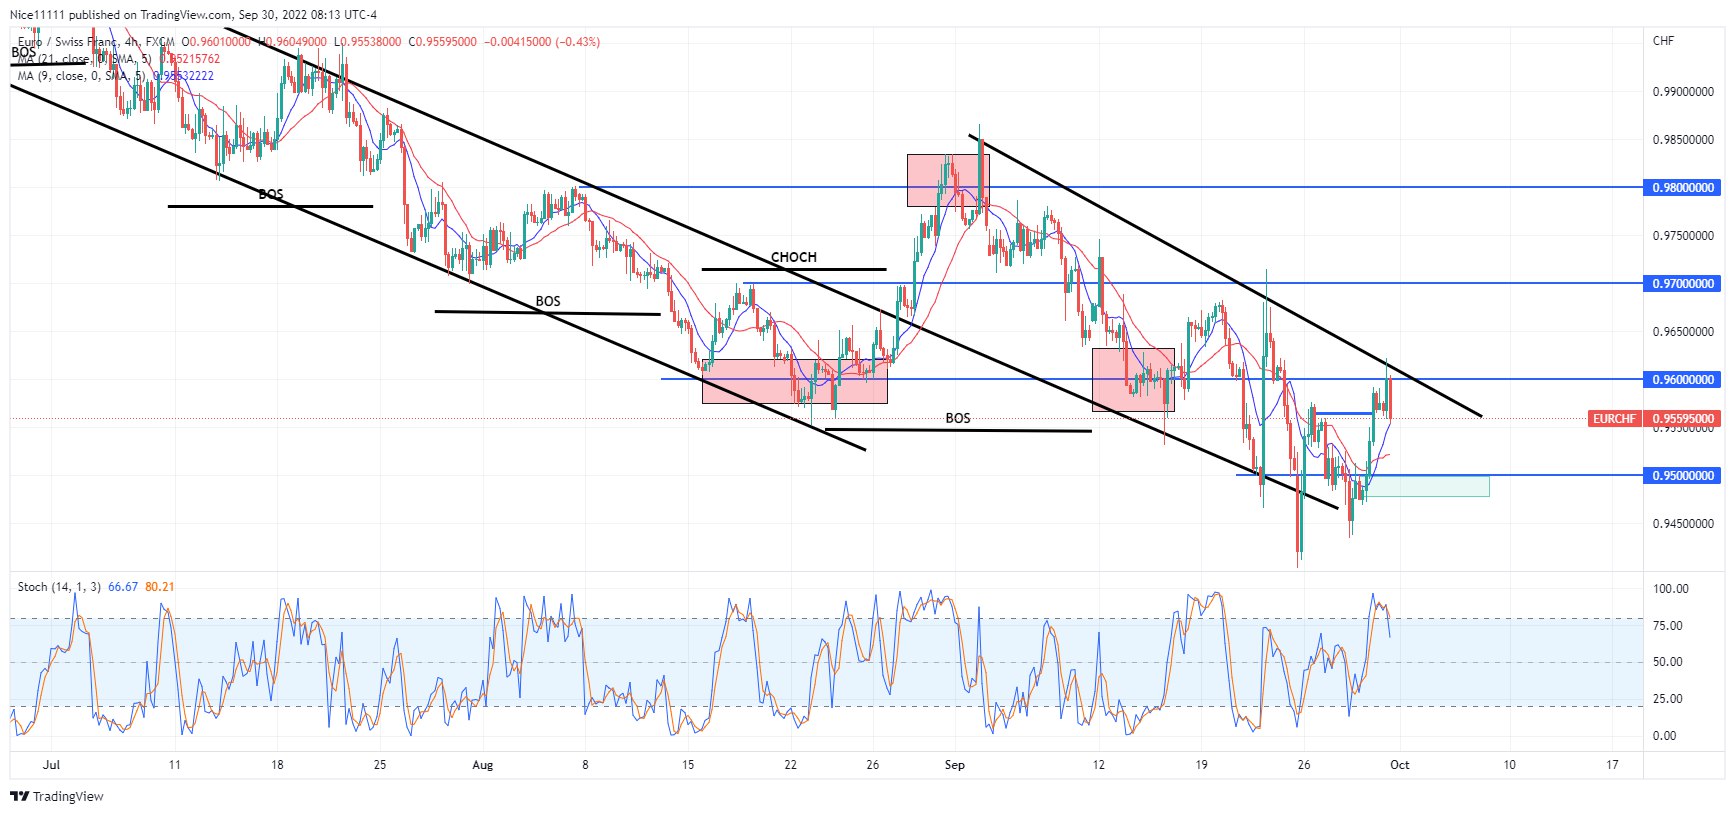 EURCHF continues the bearish institutional order flow